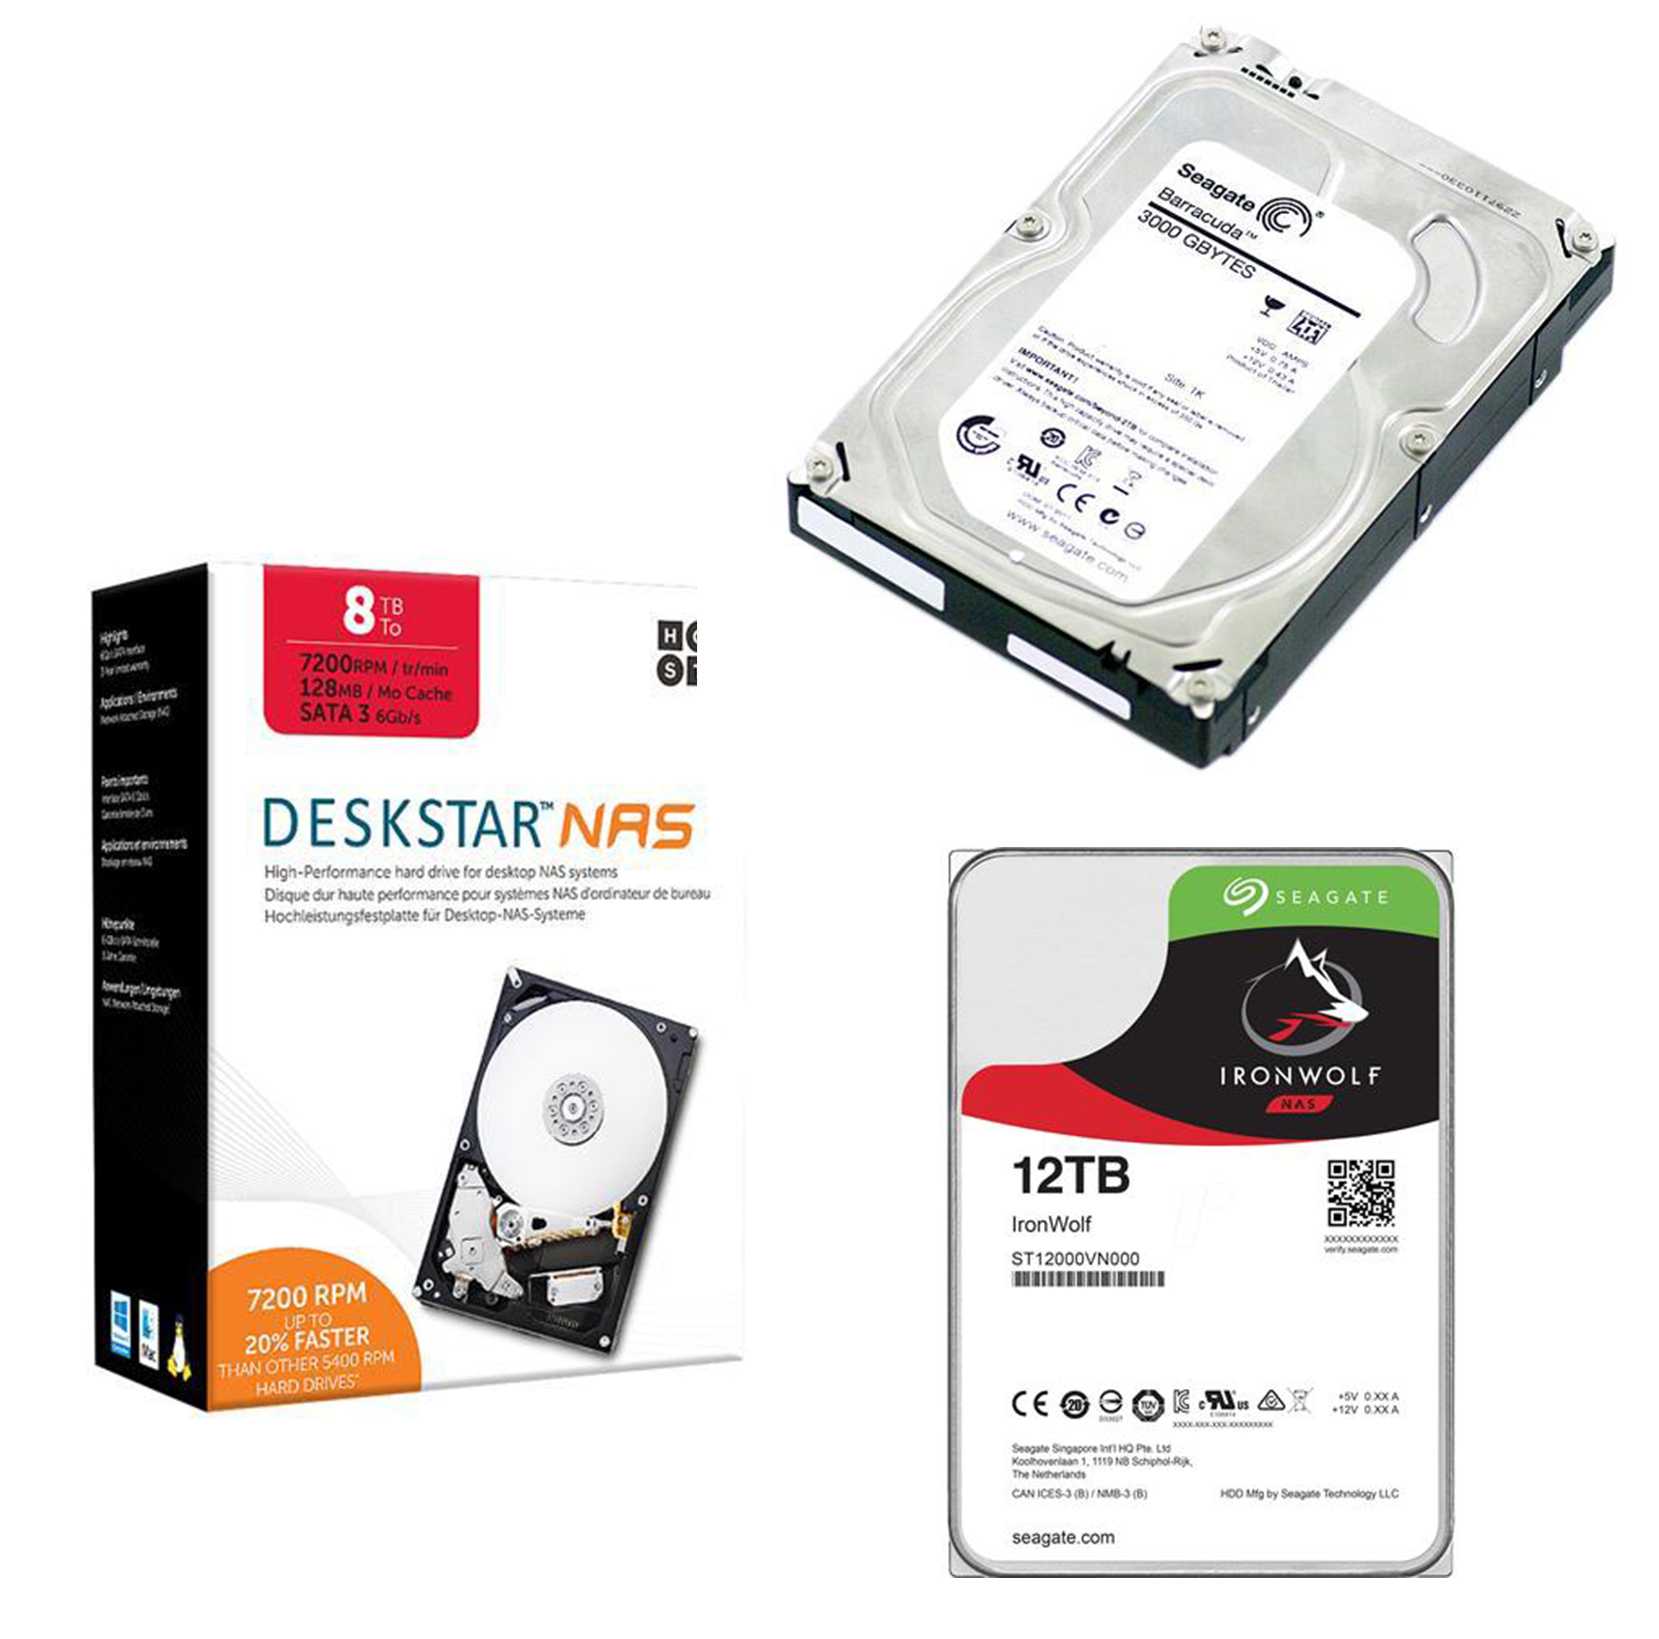 Bare HDDs